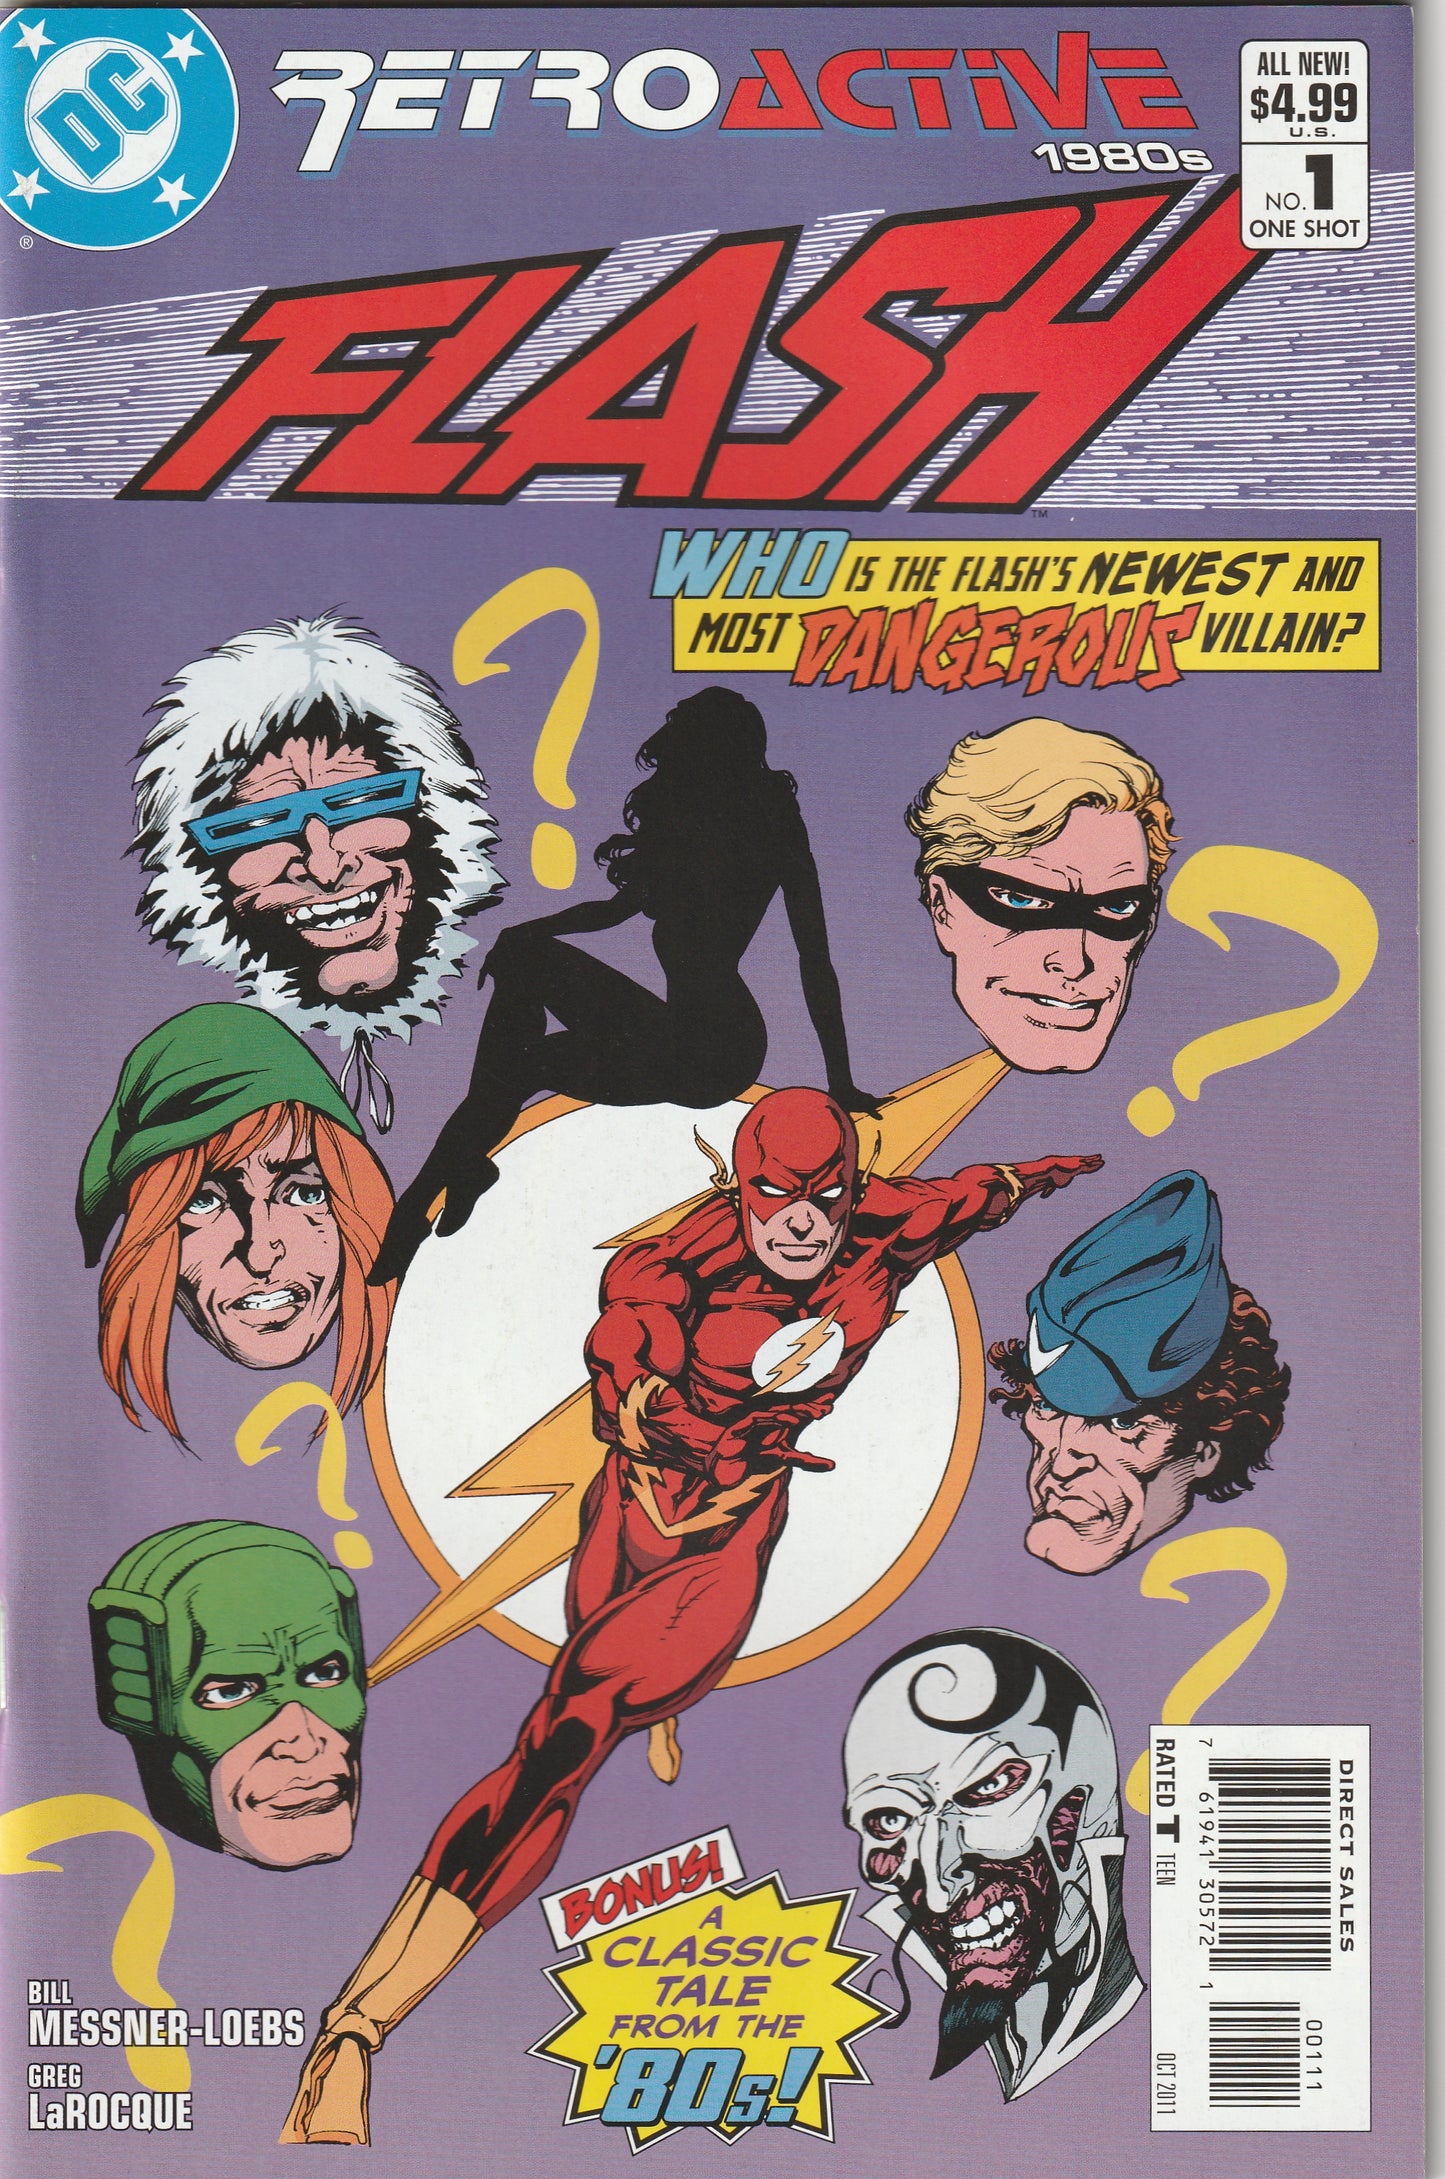 DC Retroactive:  Flash - The 80s #1 (2011) one-shot